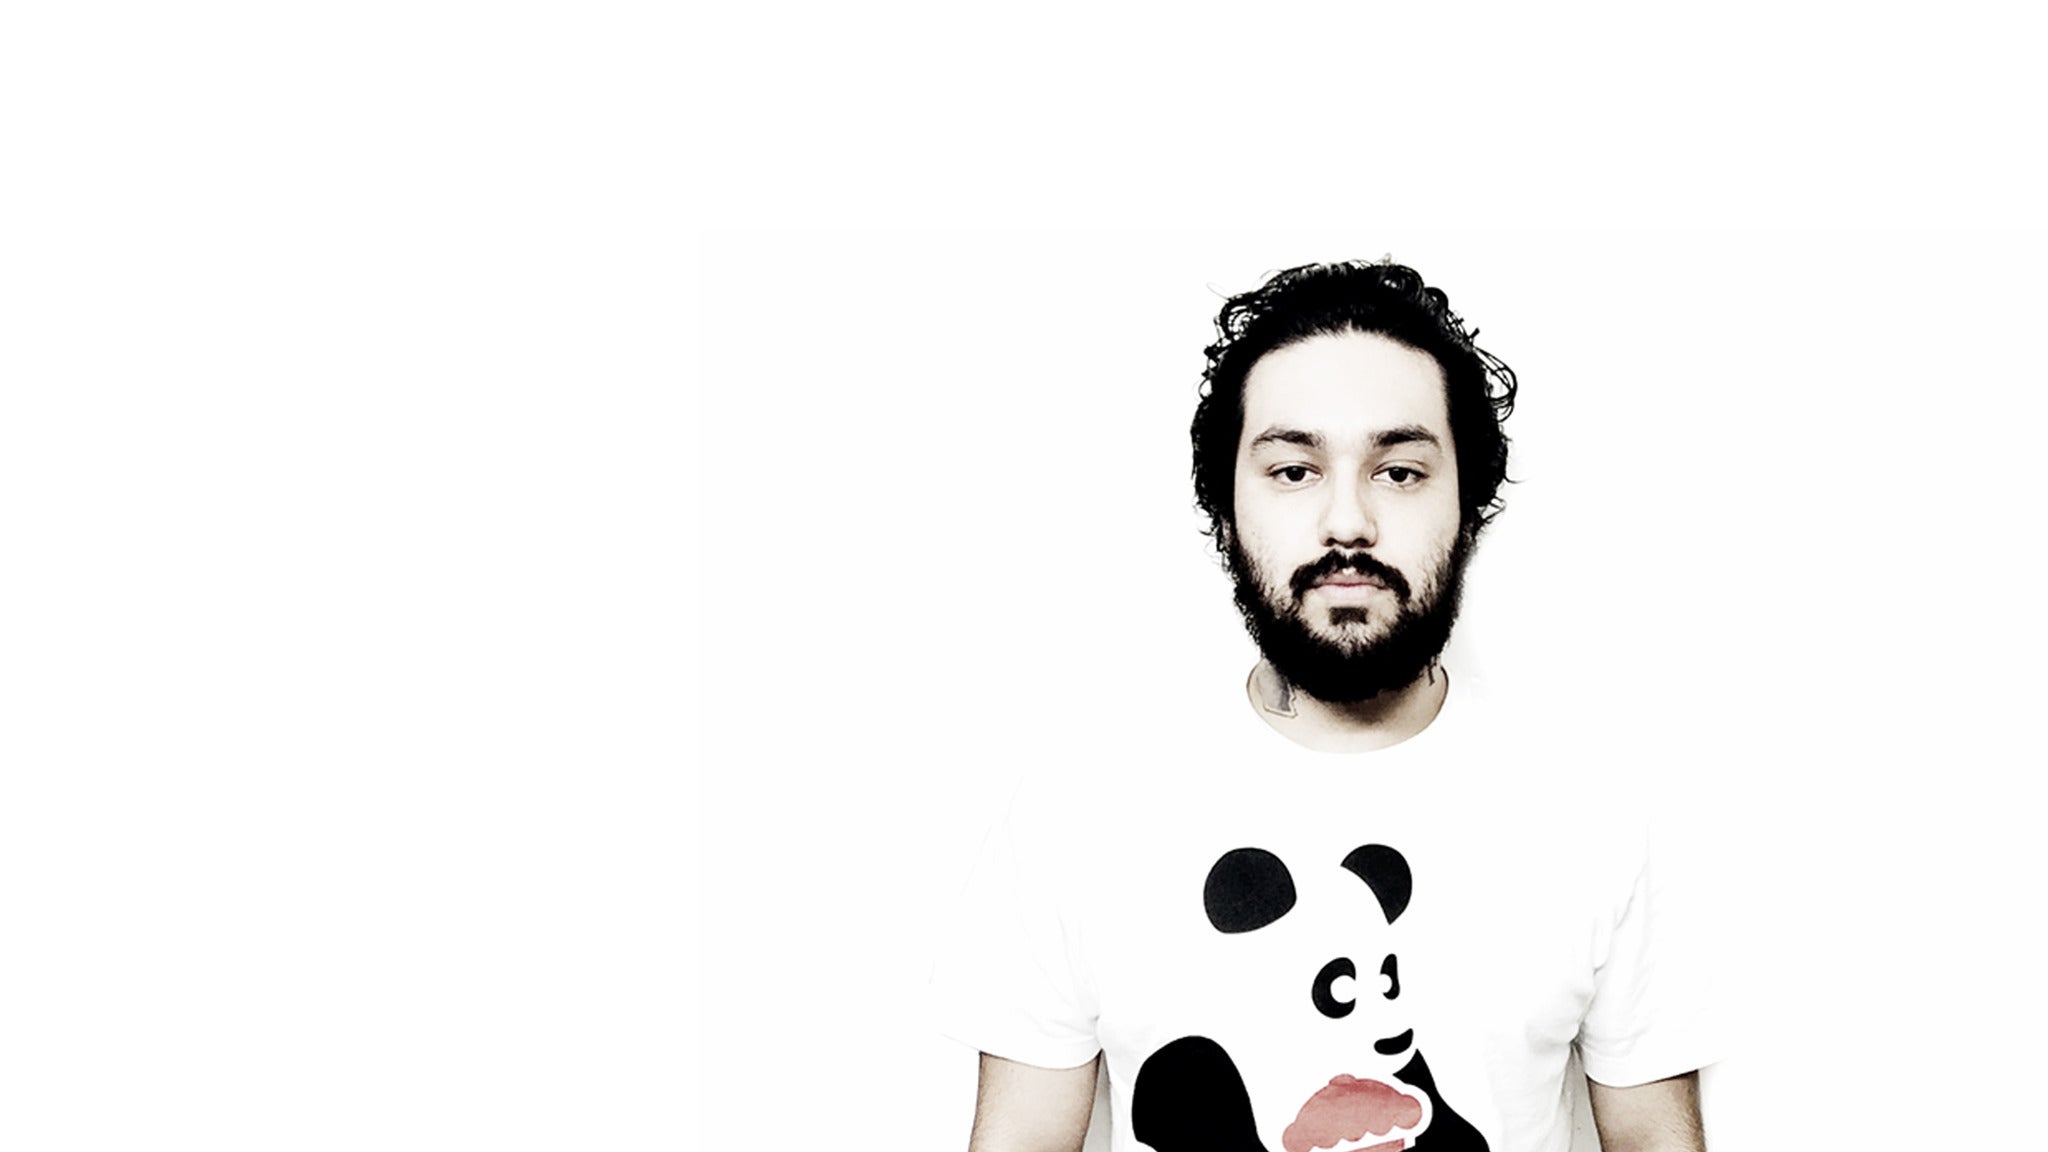 Image used with permission from Ticketmaster | Deorro tickets